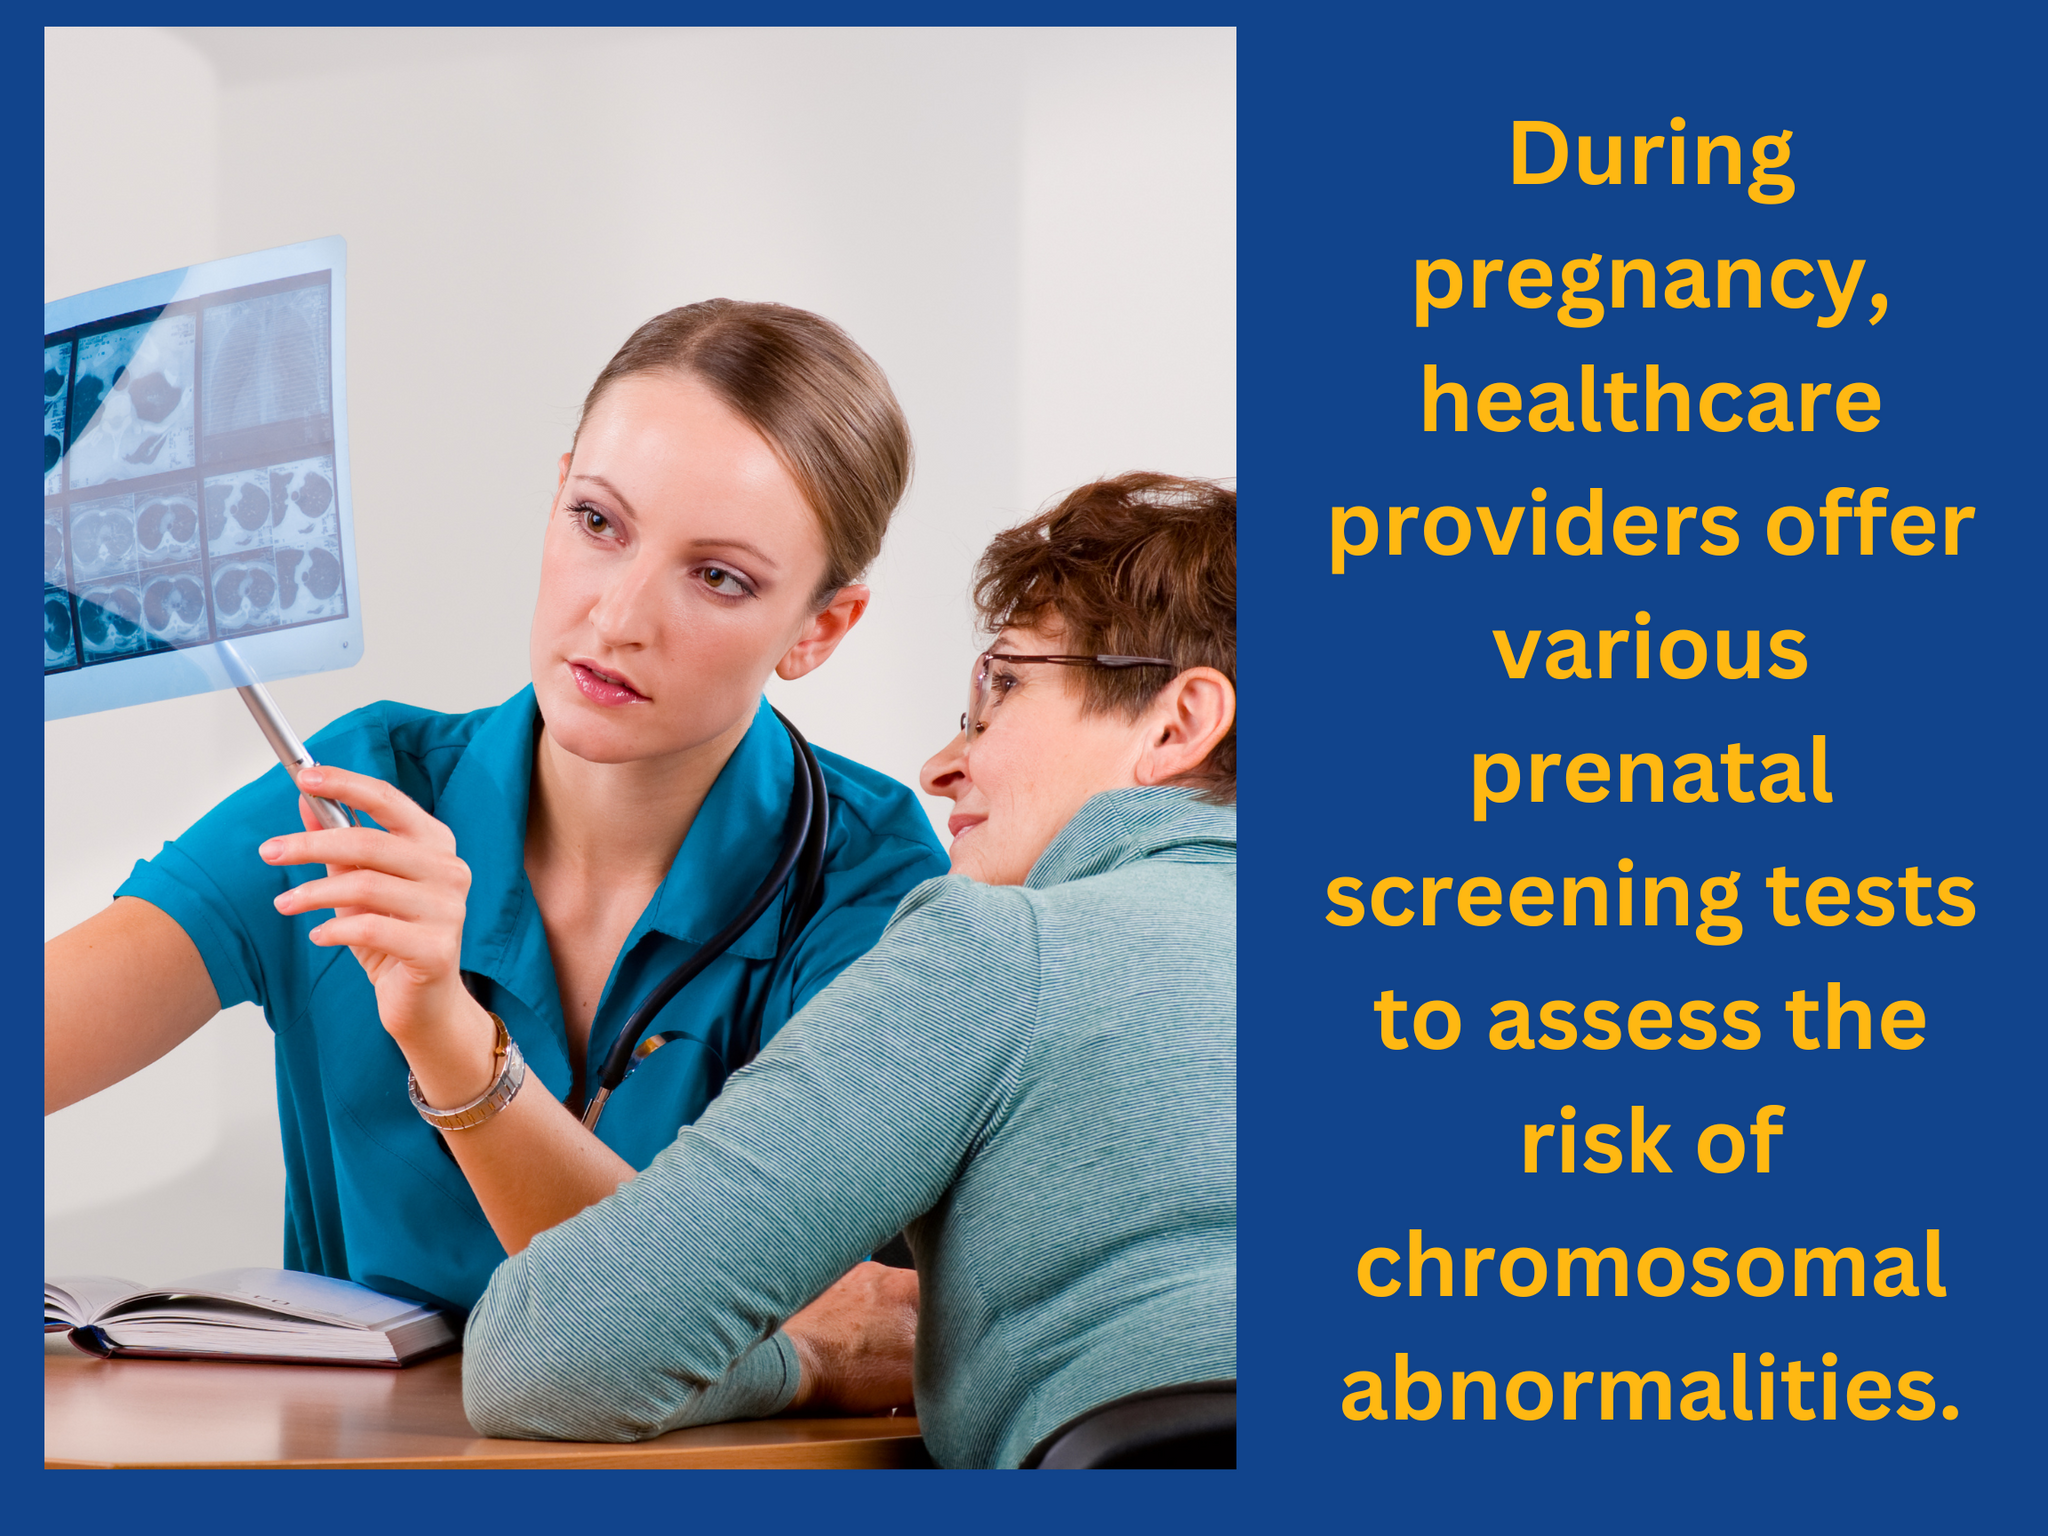 Prenatal tests to assess the risk of chromosomal abnormalities.